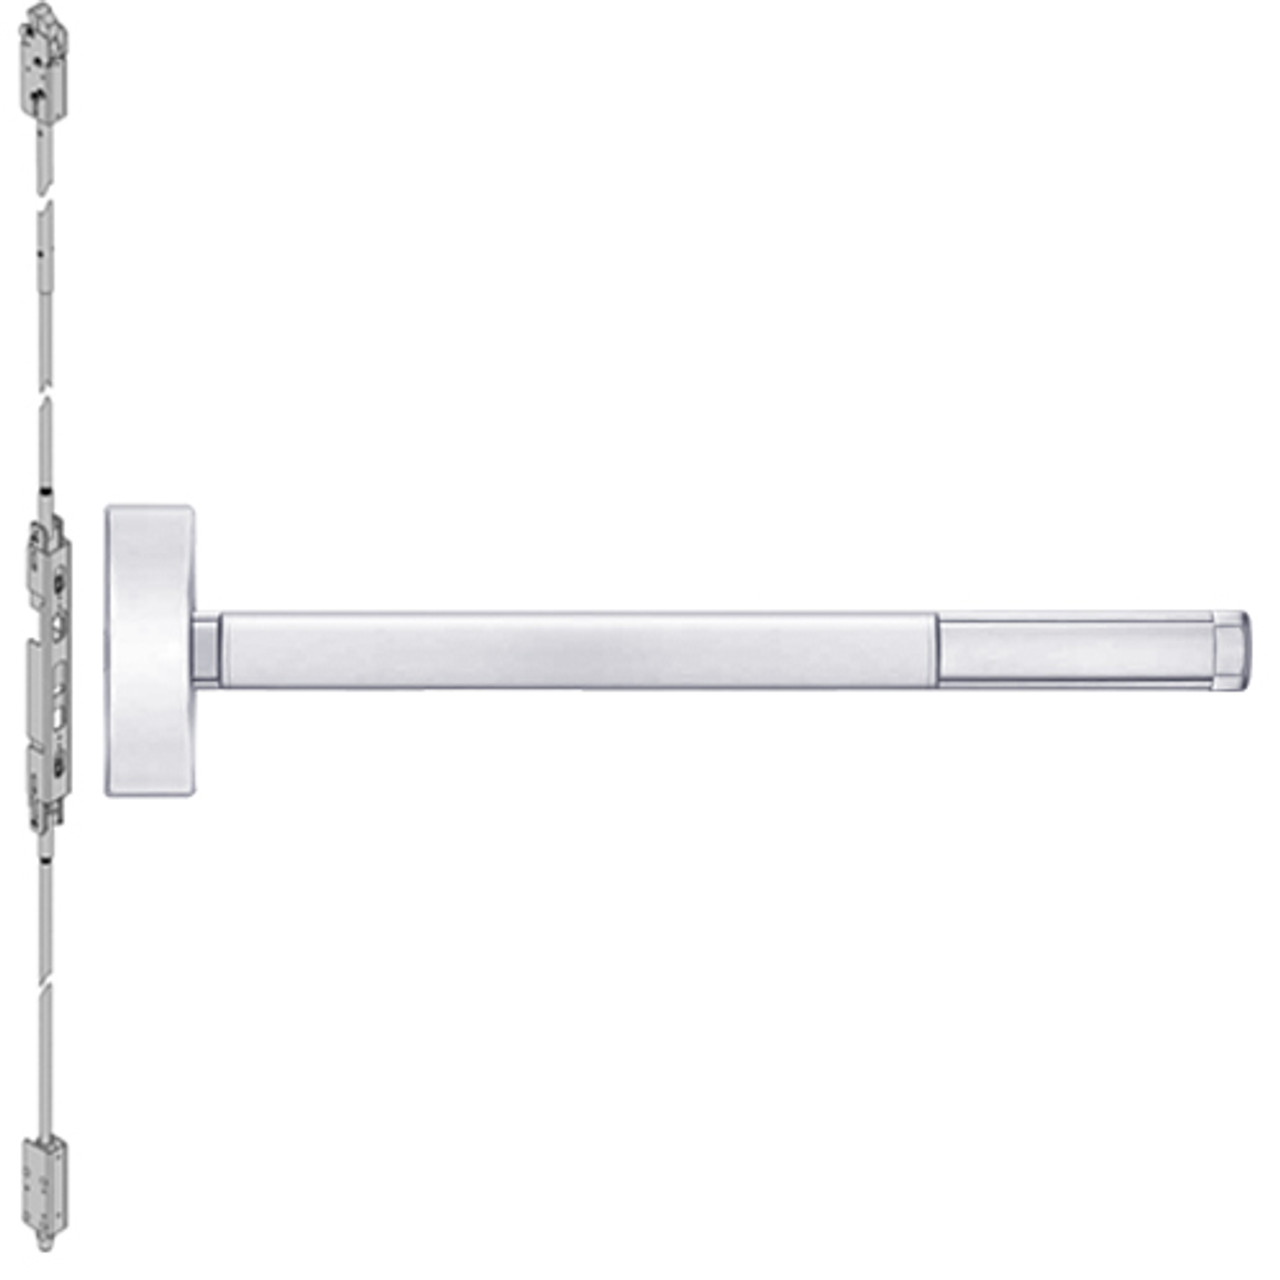 TS2805LBR-625-36 PHI 2800 Series Concealed Vertical Rod Exit Device with Touchbar Monitoring Switch Prepped for Key Controls Thumb Piece in Bright Chrome Finish